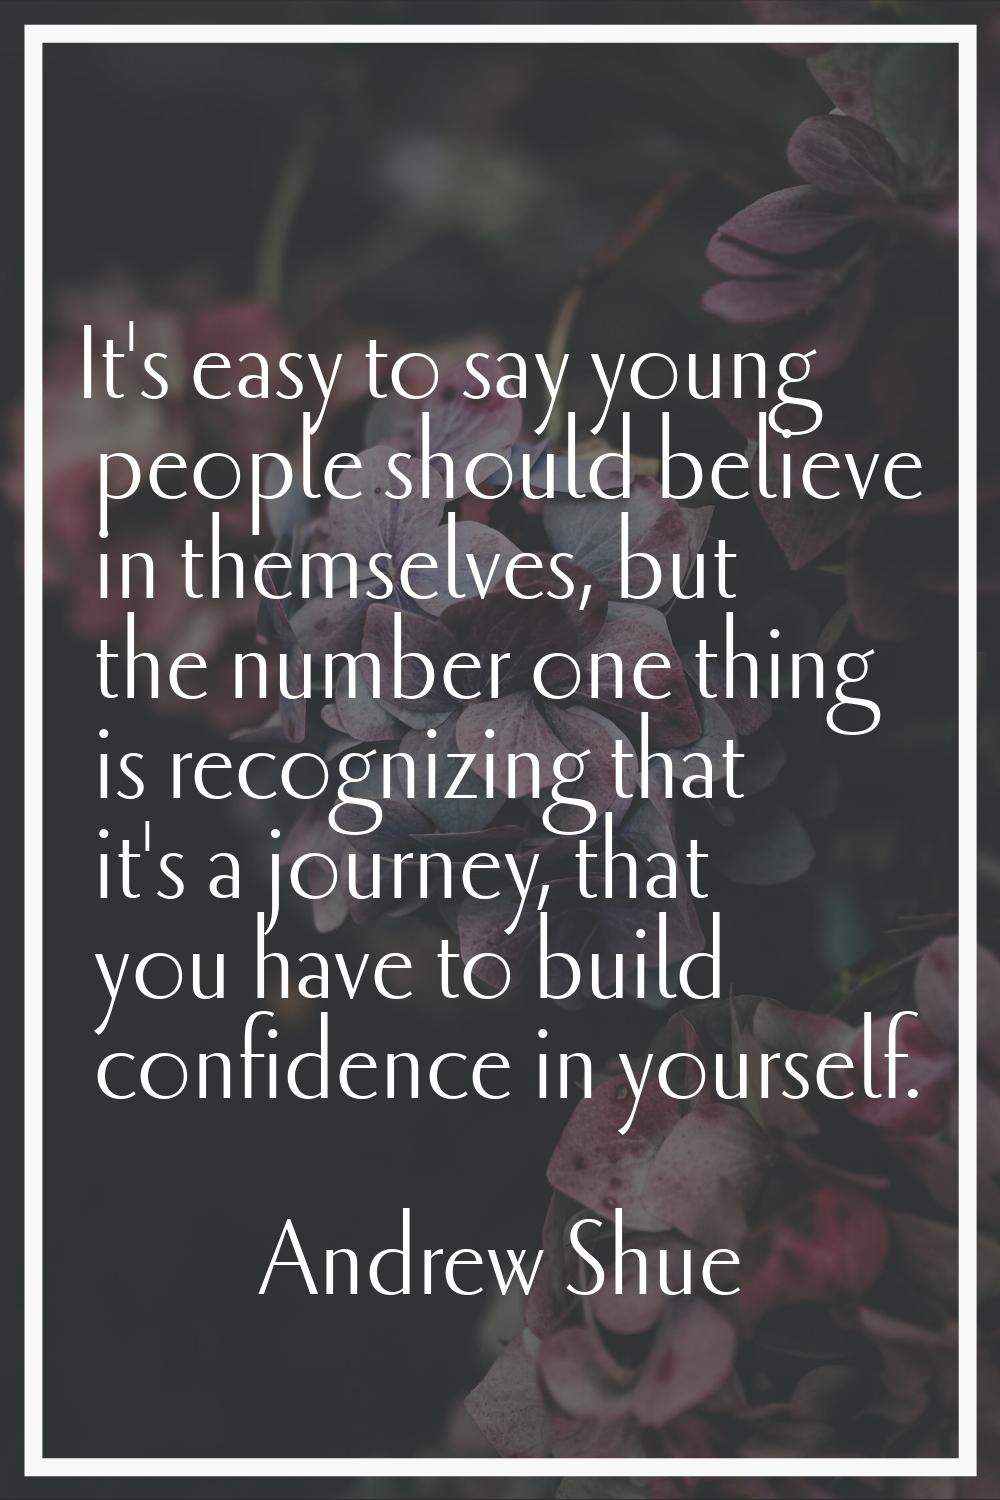 It's easy to say young people should believe in themselves, but the number one thing is recognizing